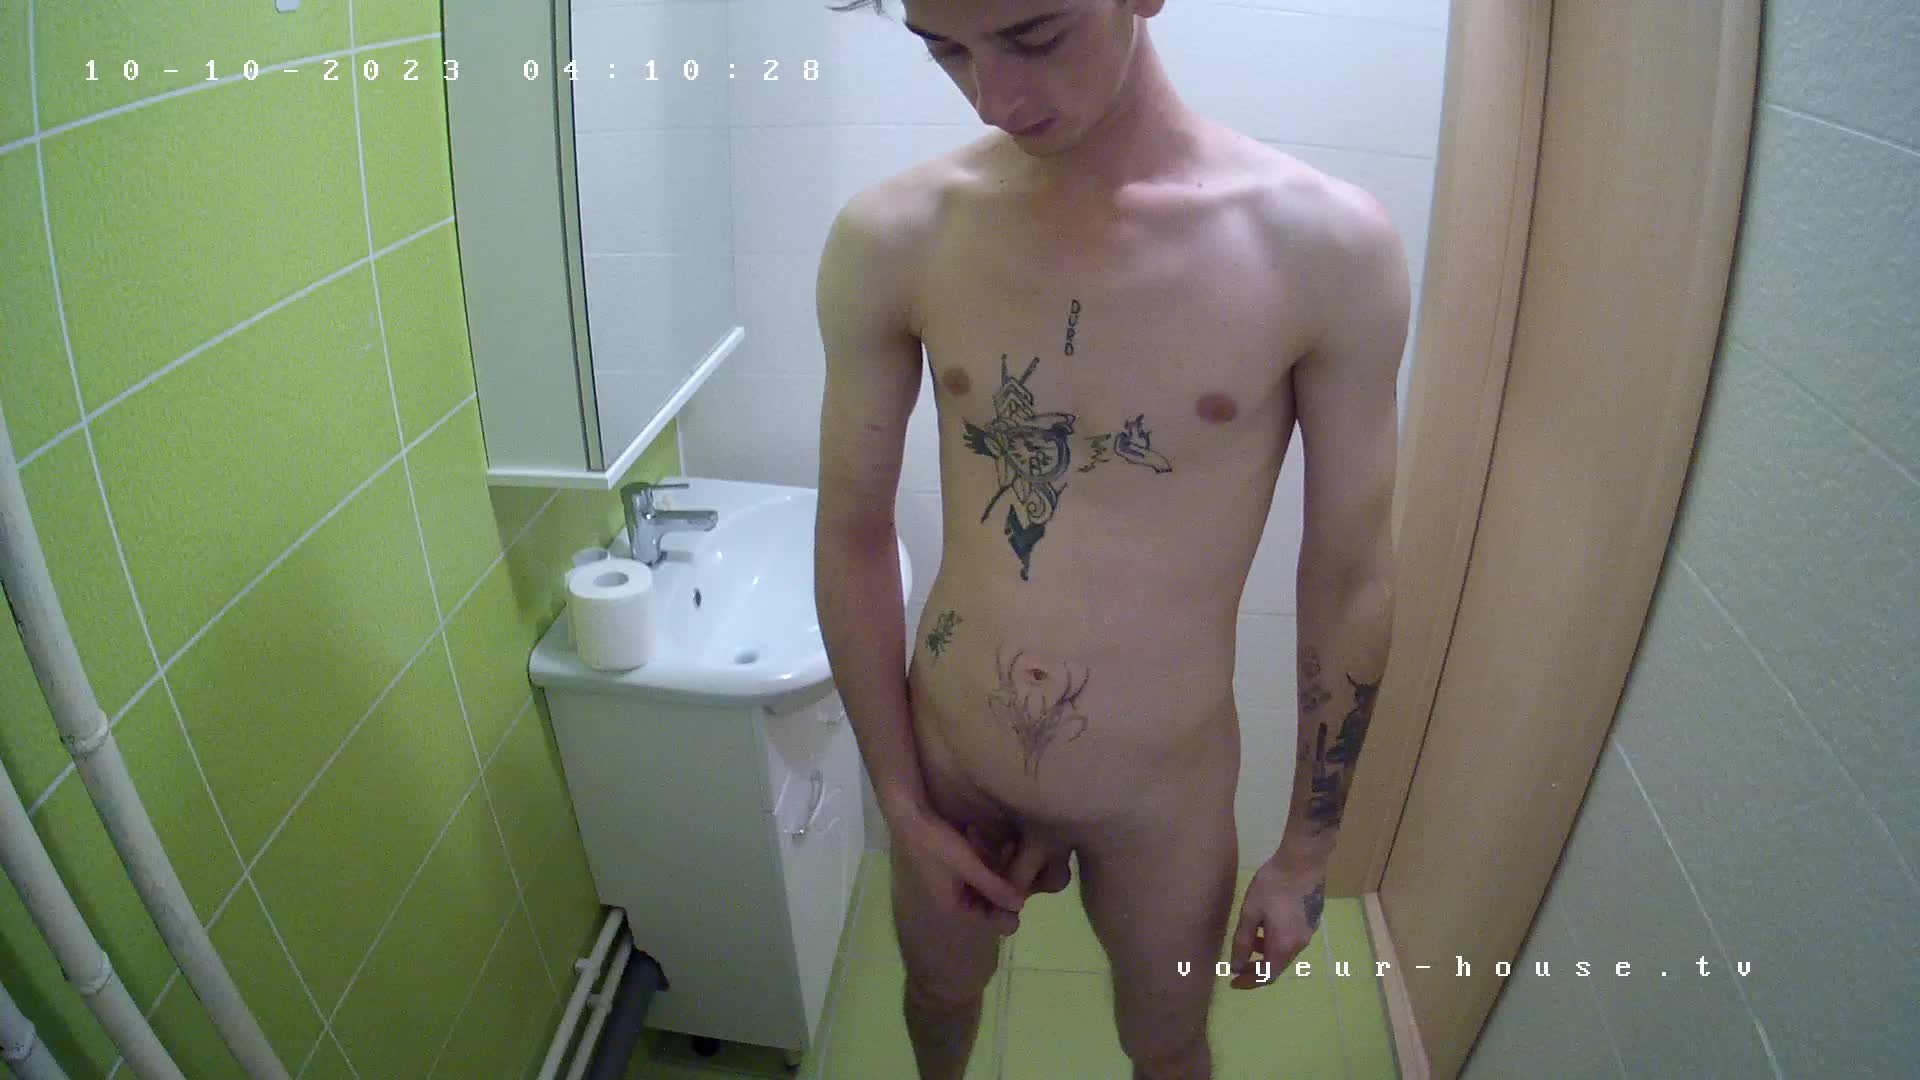 Tristan peeing naked 10 Oct 2023